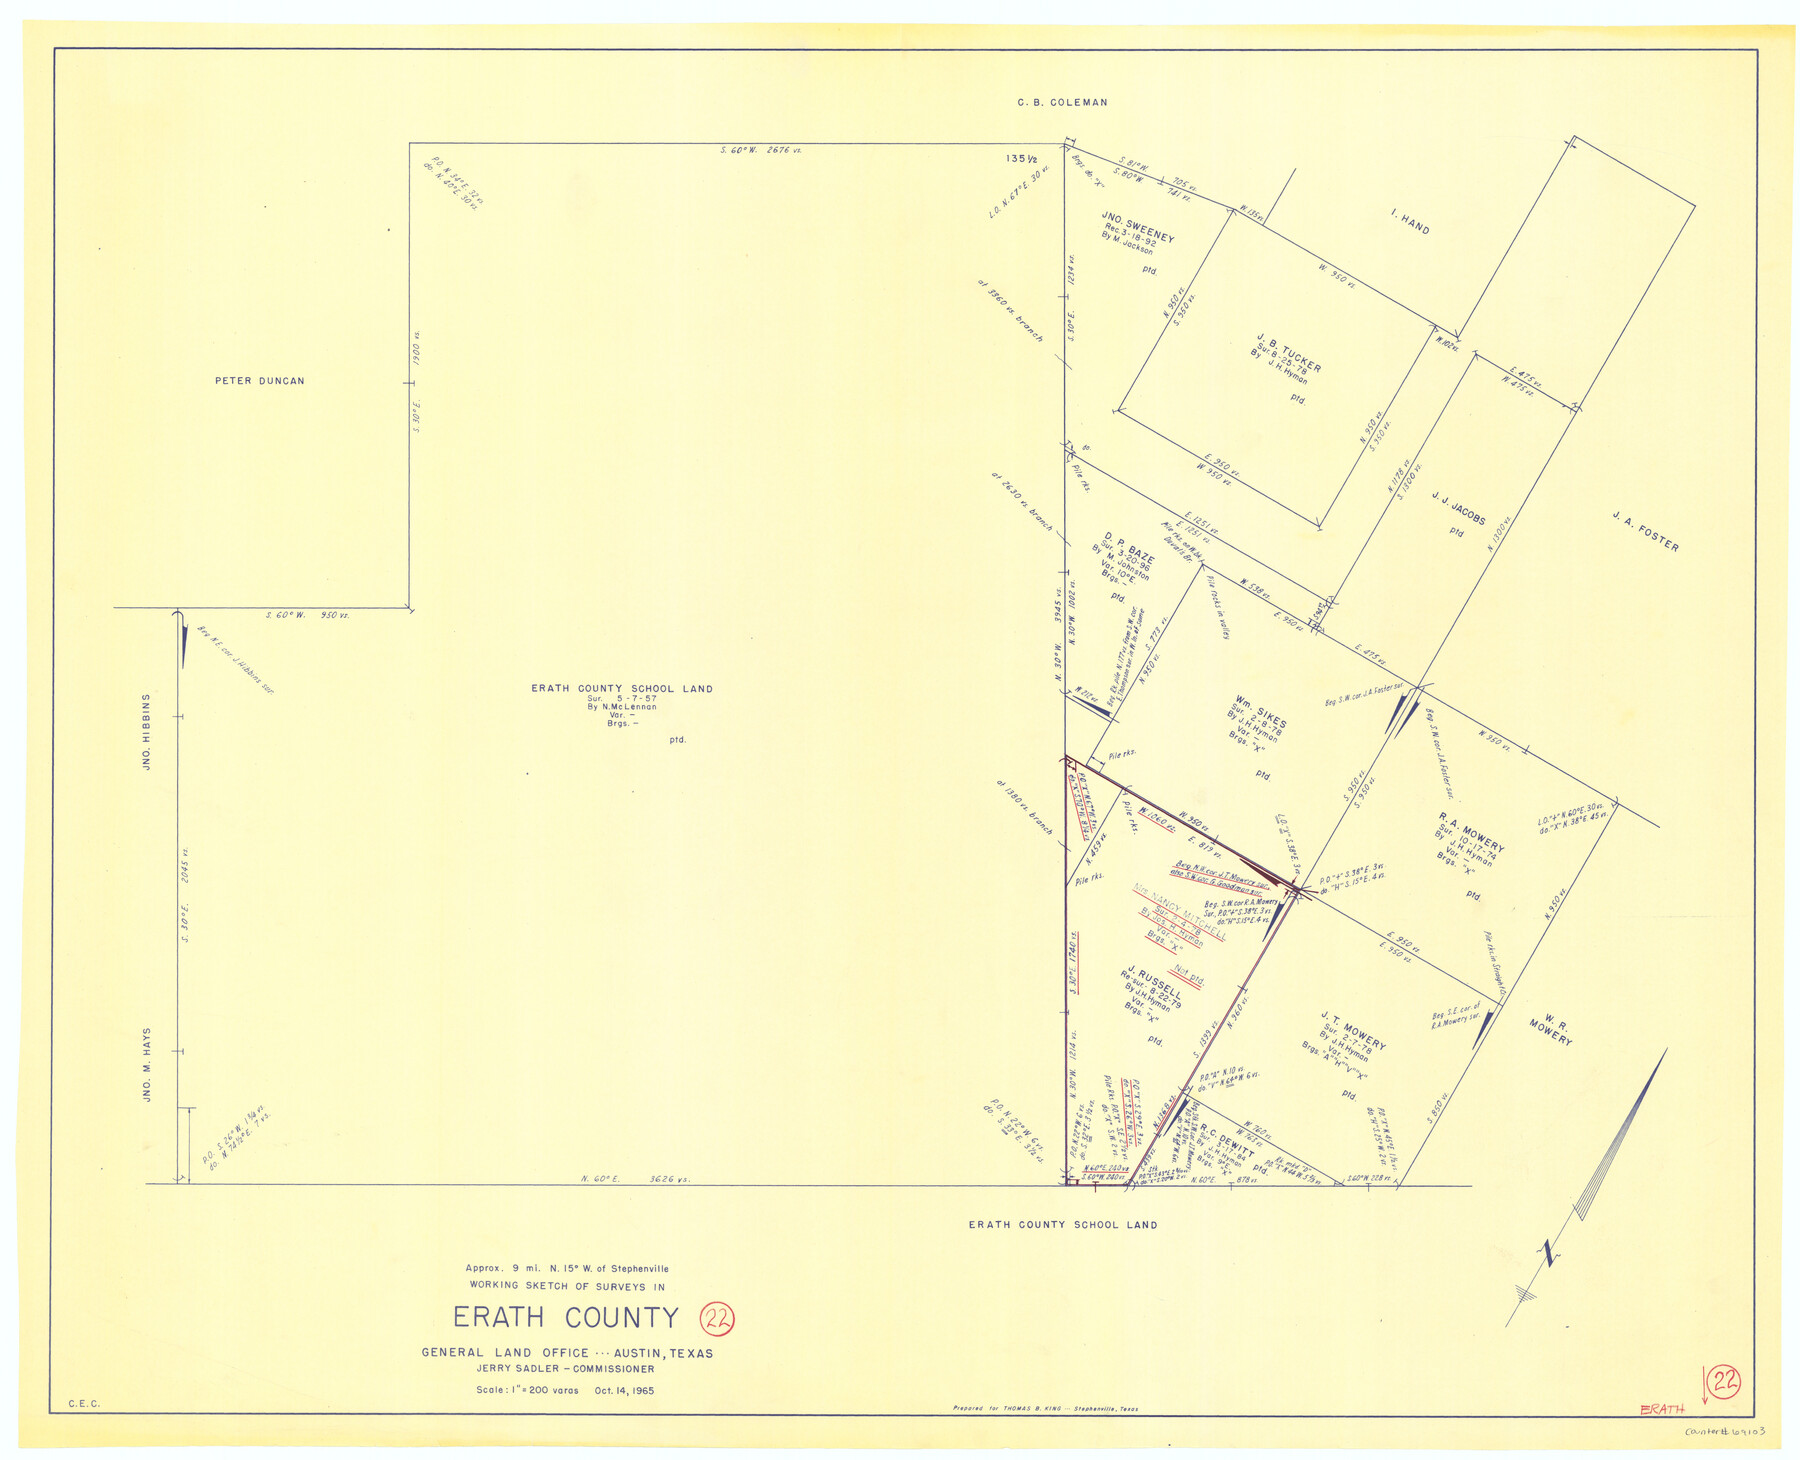 69103, Erath County Working Sketch 22, General Map Collection